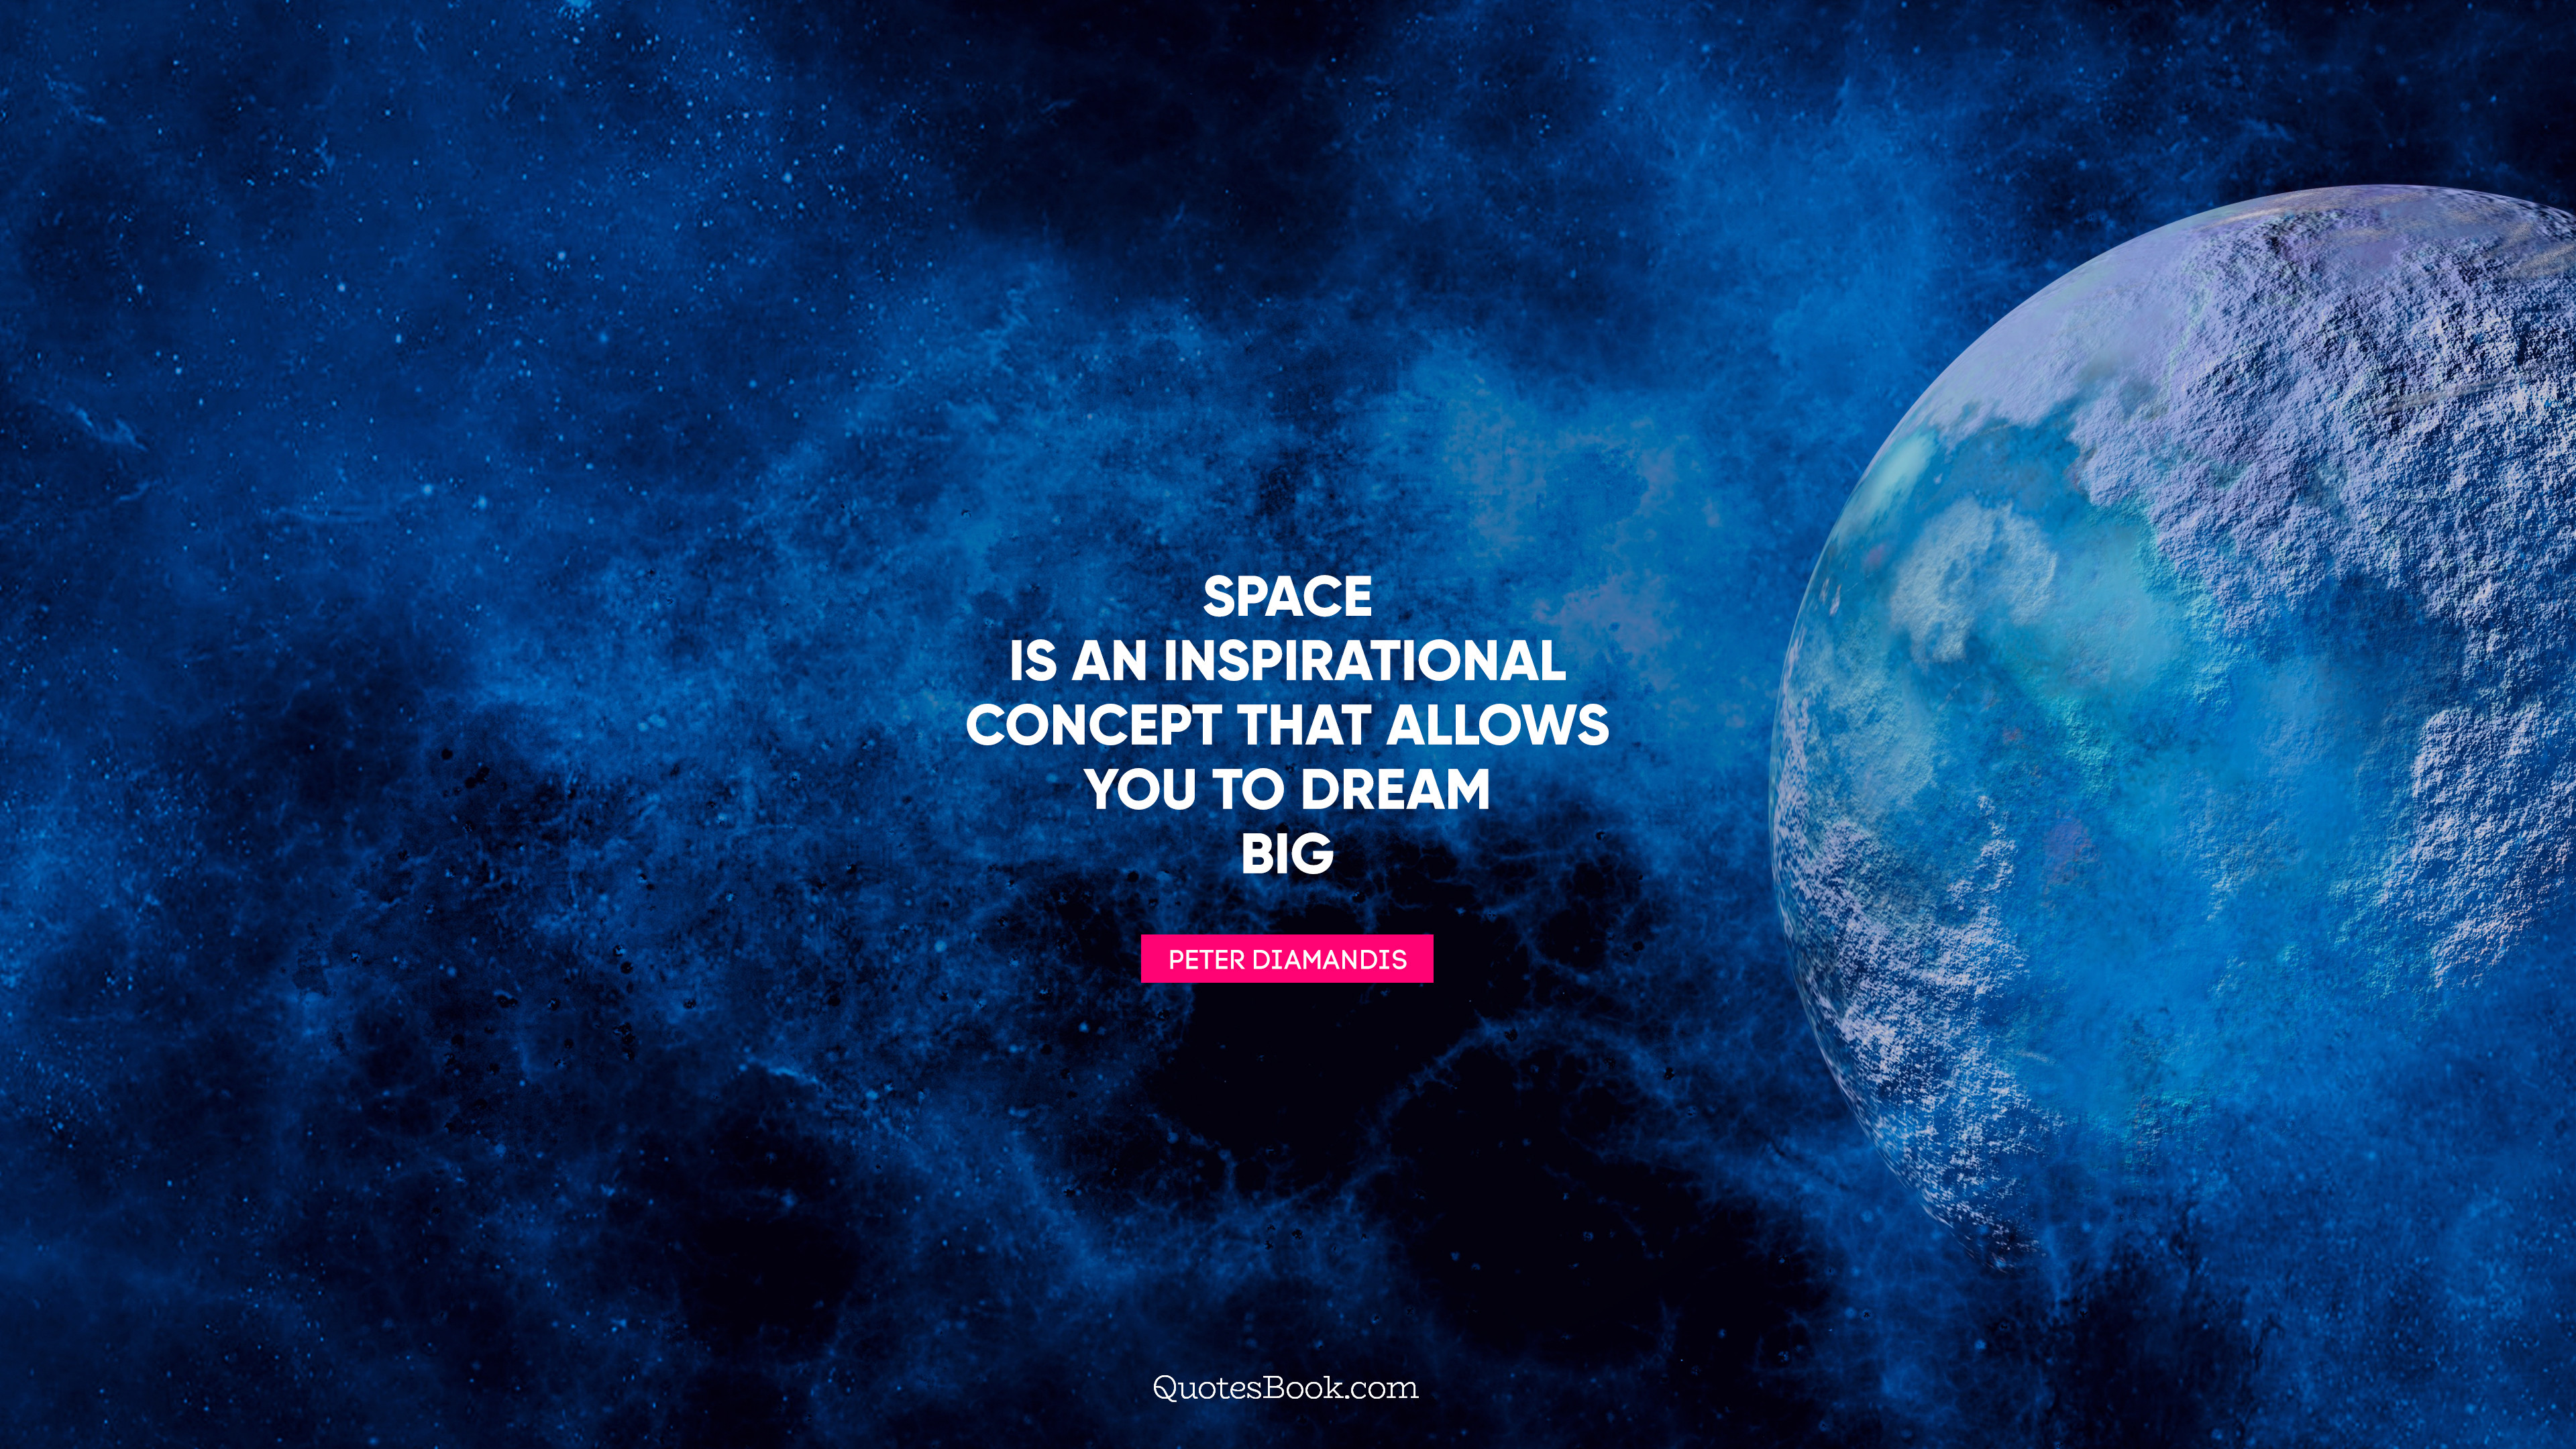 Space is an inspirational concept that allows you to dream big. - Quote